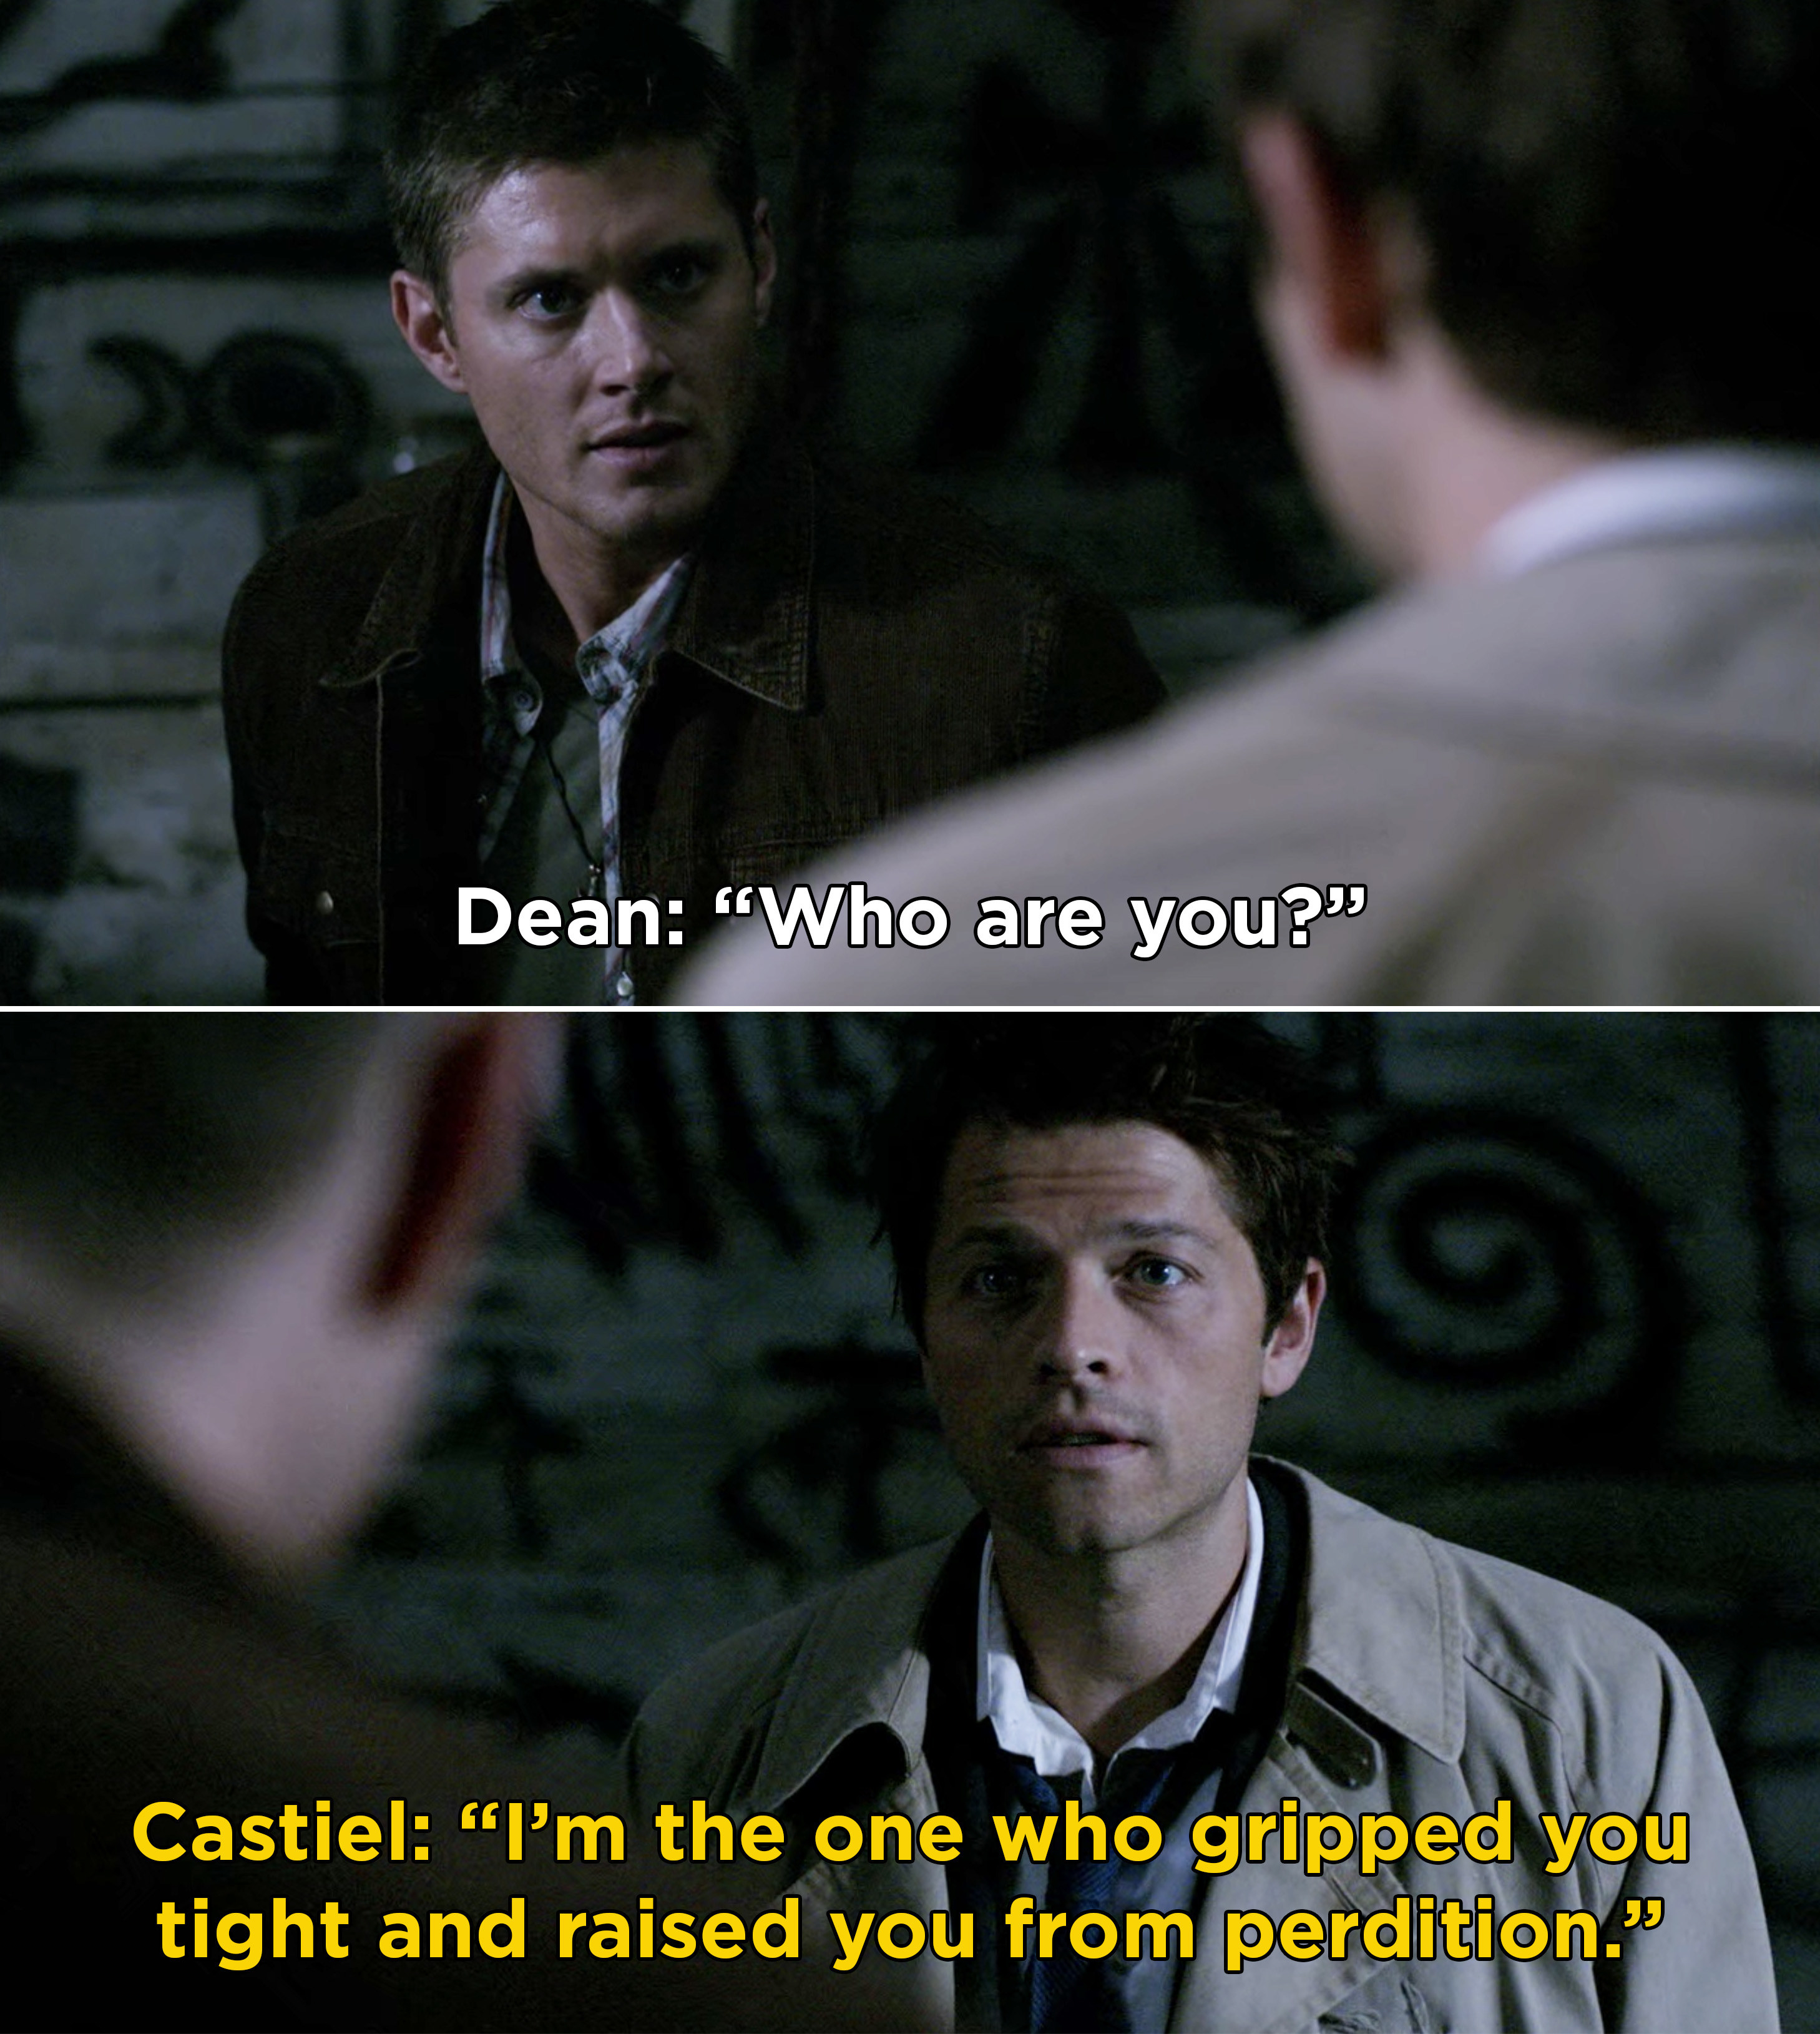 Castiel introducing himself to Dean and saying, &quot;I’m the one who gripped you tight and raised you from perdition&quot;